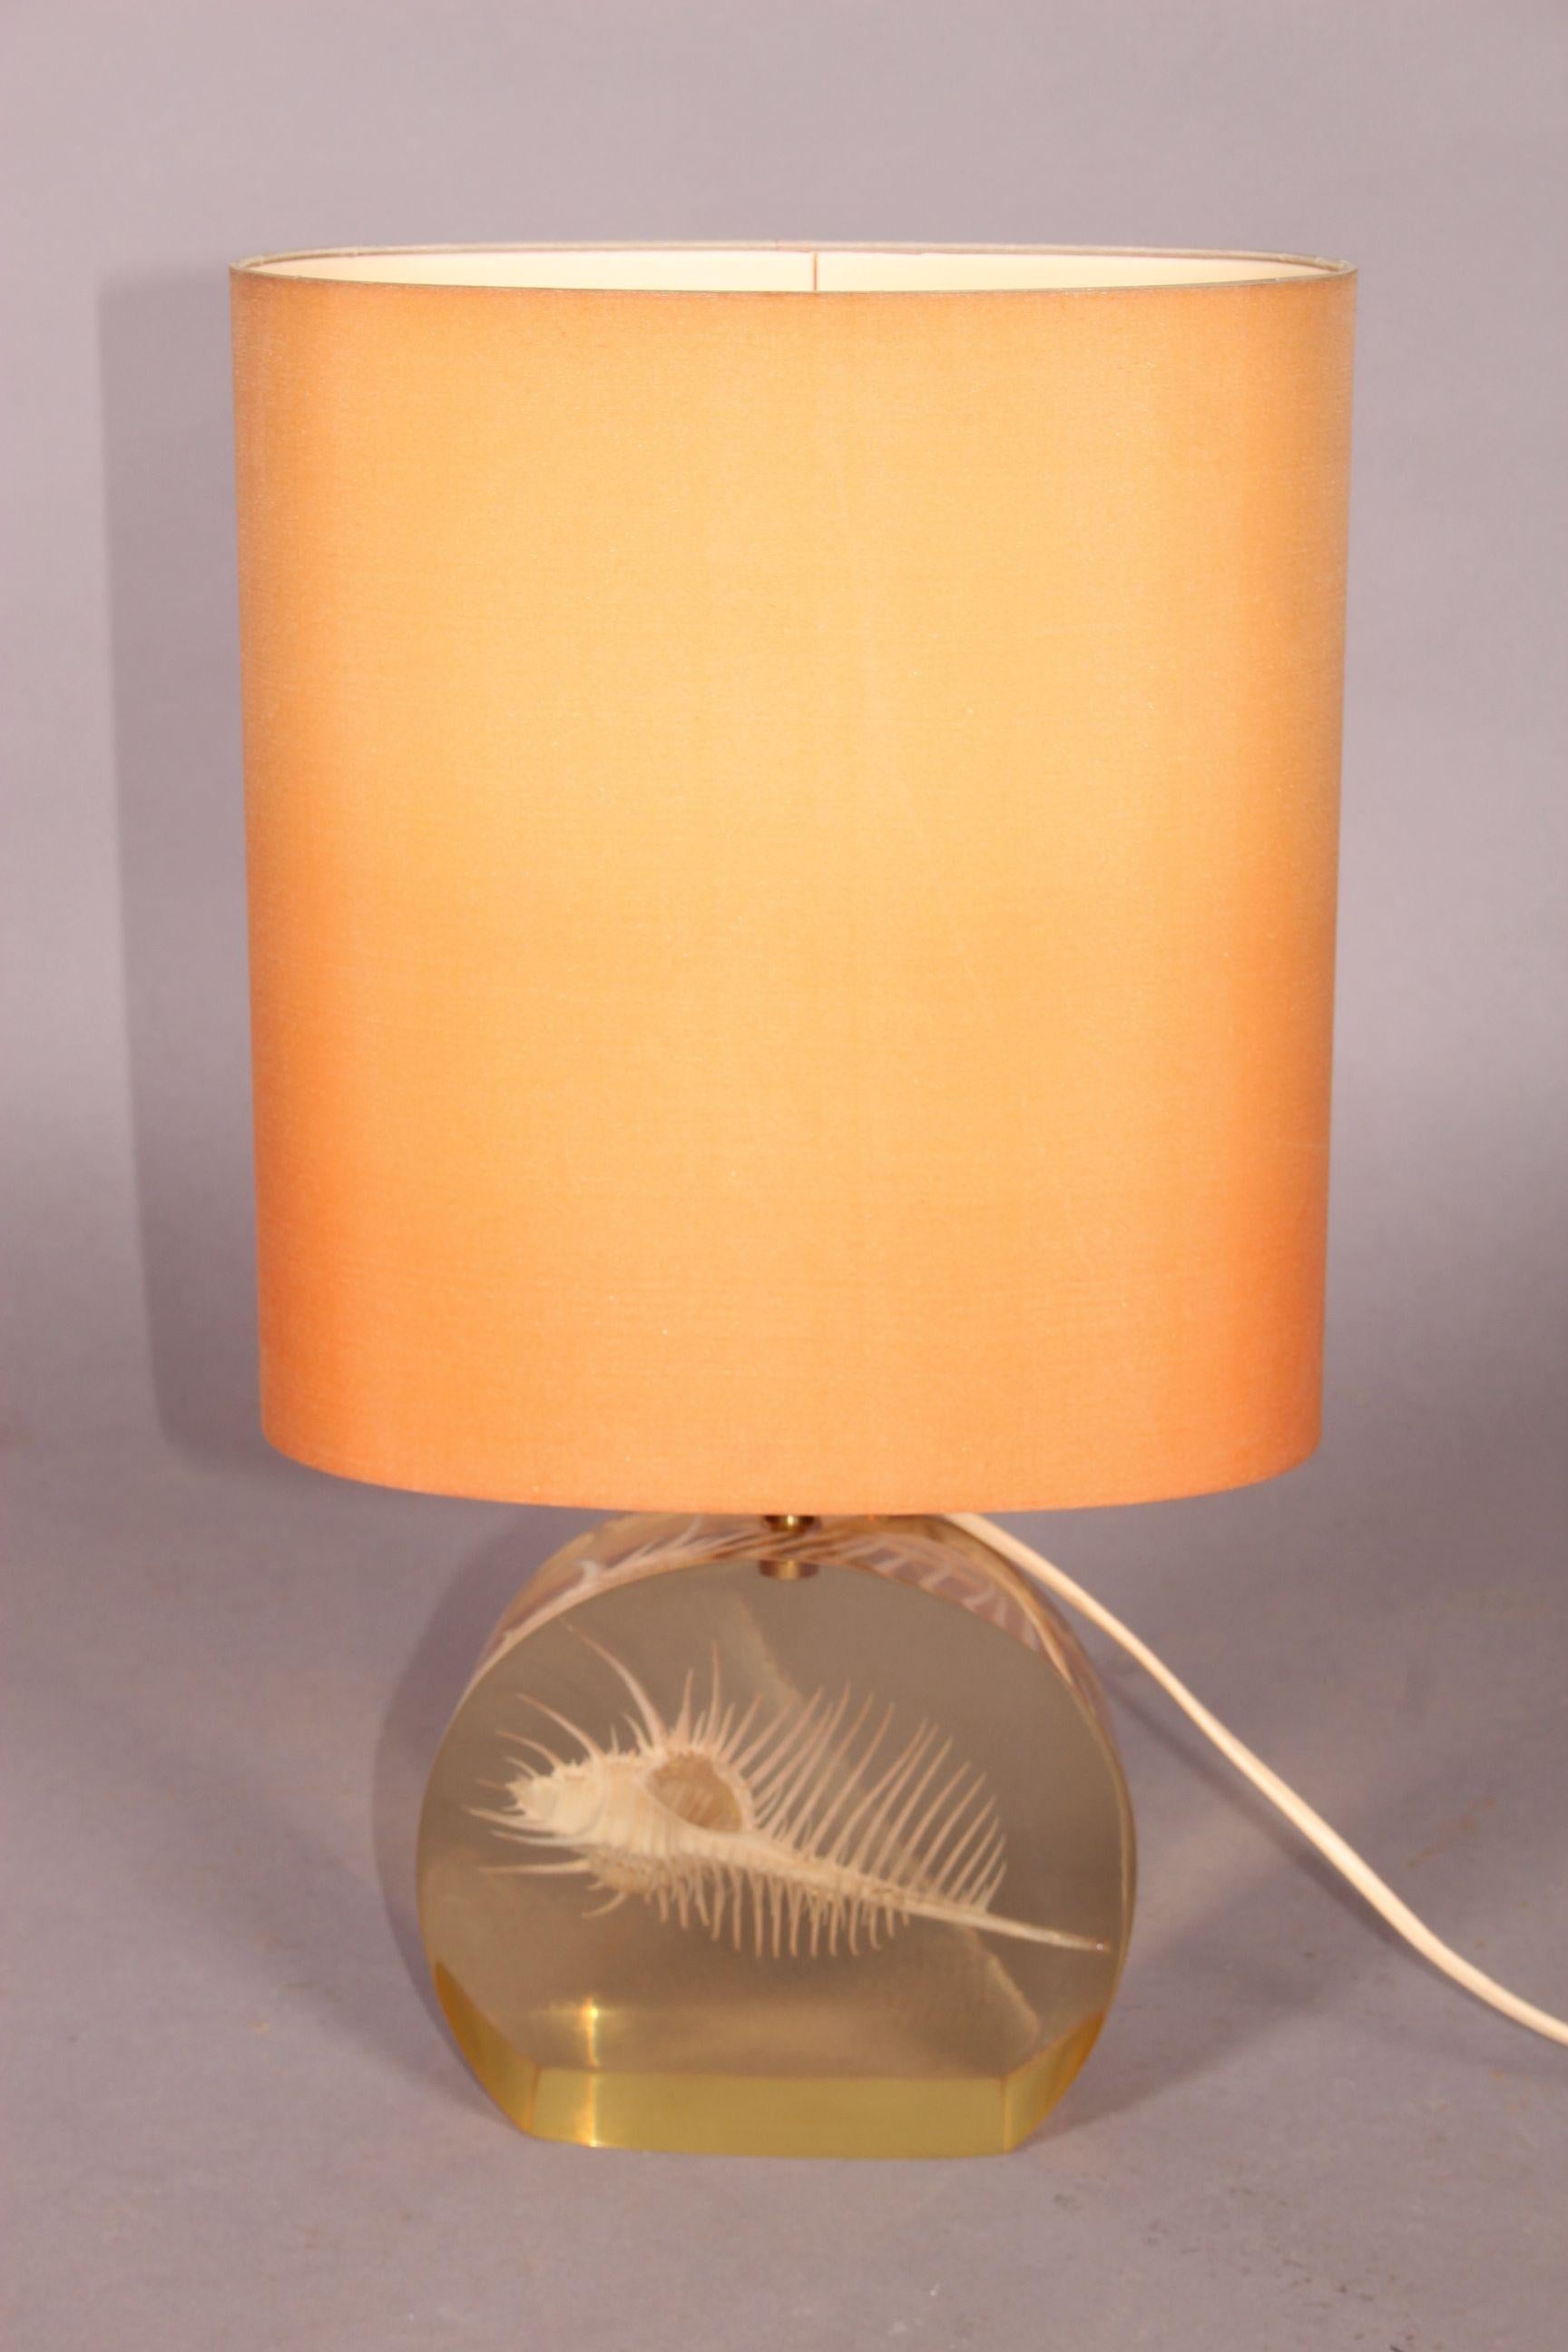 Plexiglass table lamp, dimensions without shade H23, D17, W6.